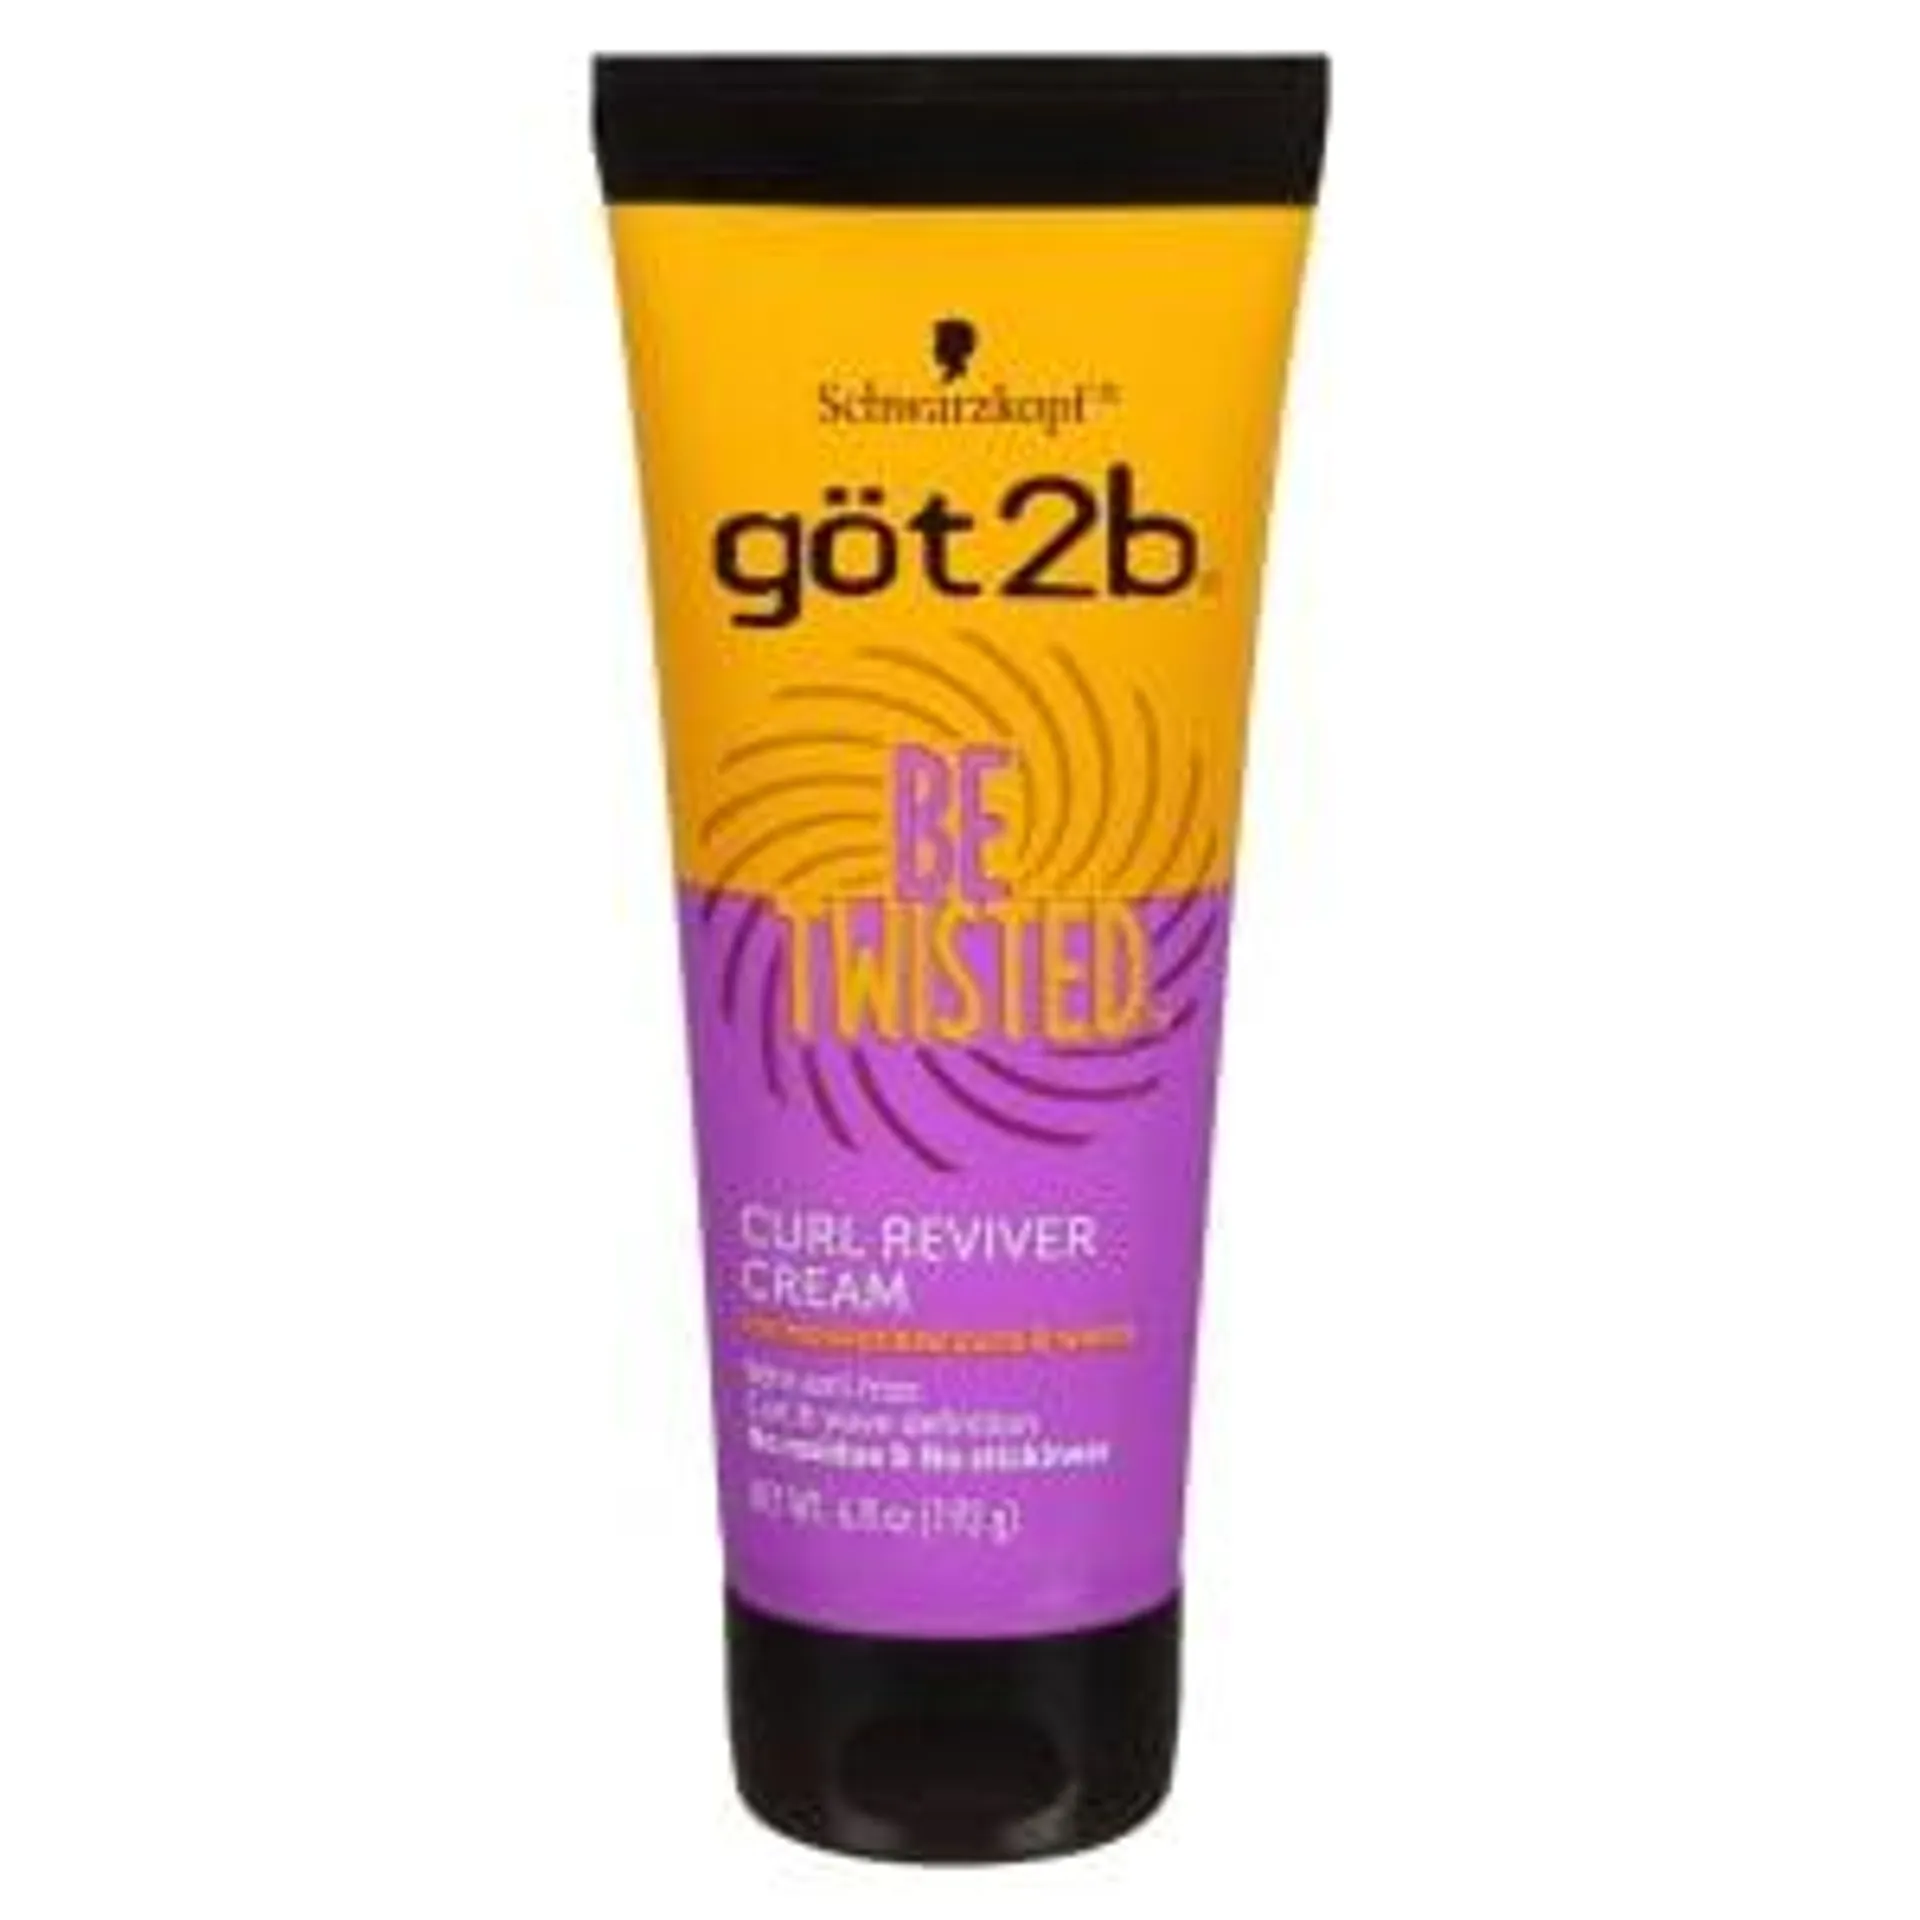 Got2b Be Twisted Curl Reviver Cream, 6.8 oz.